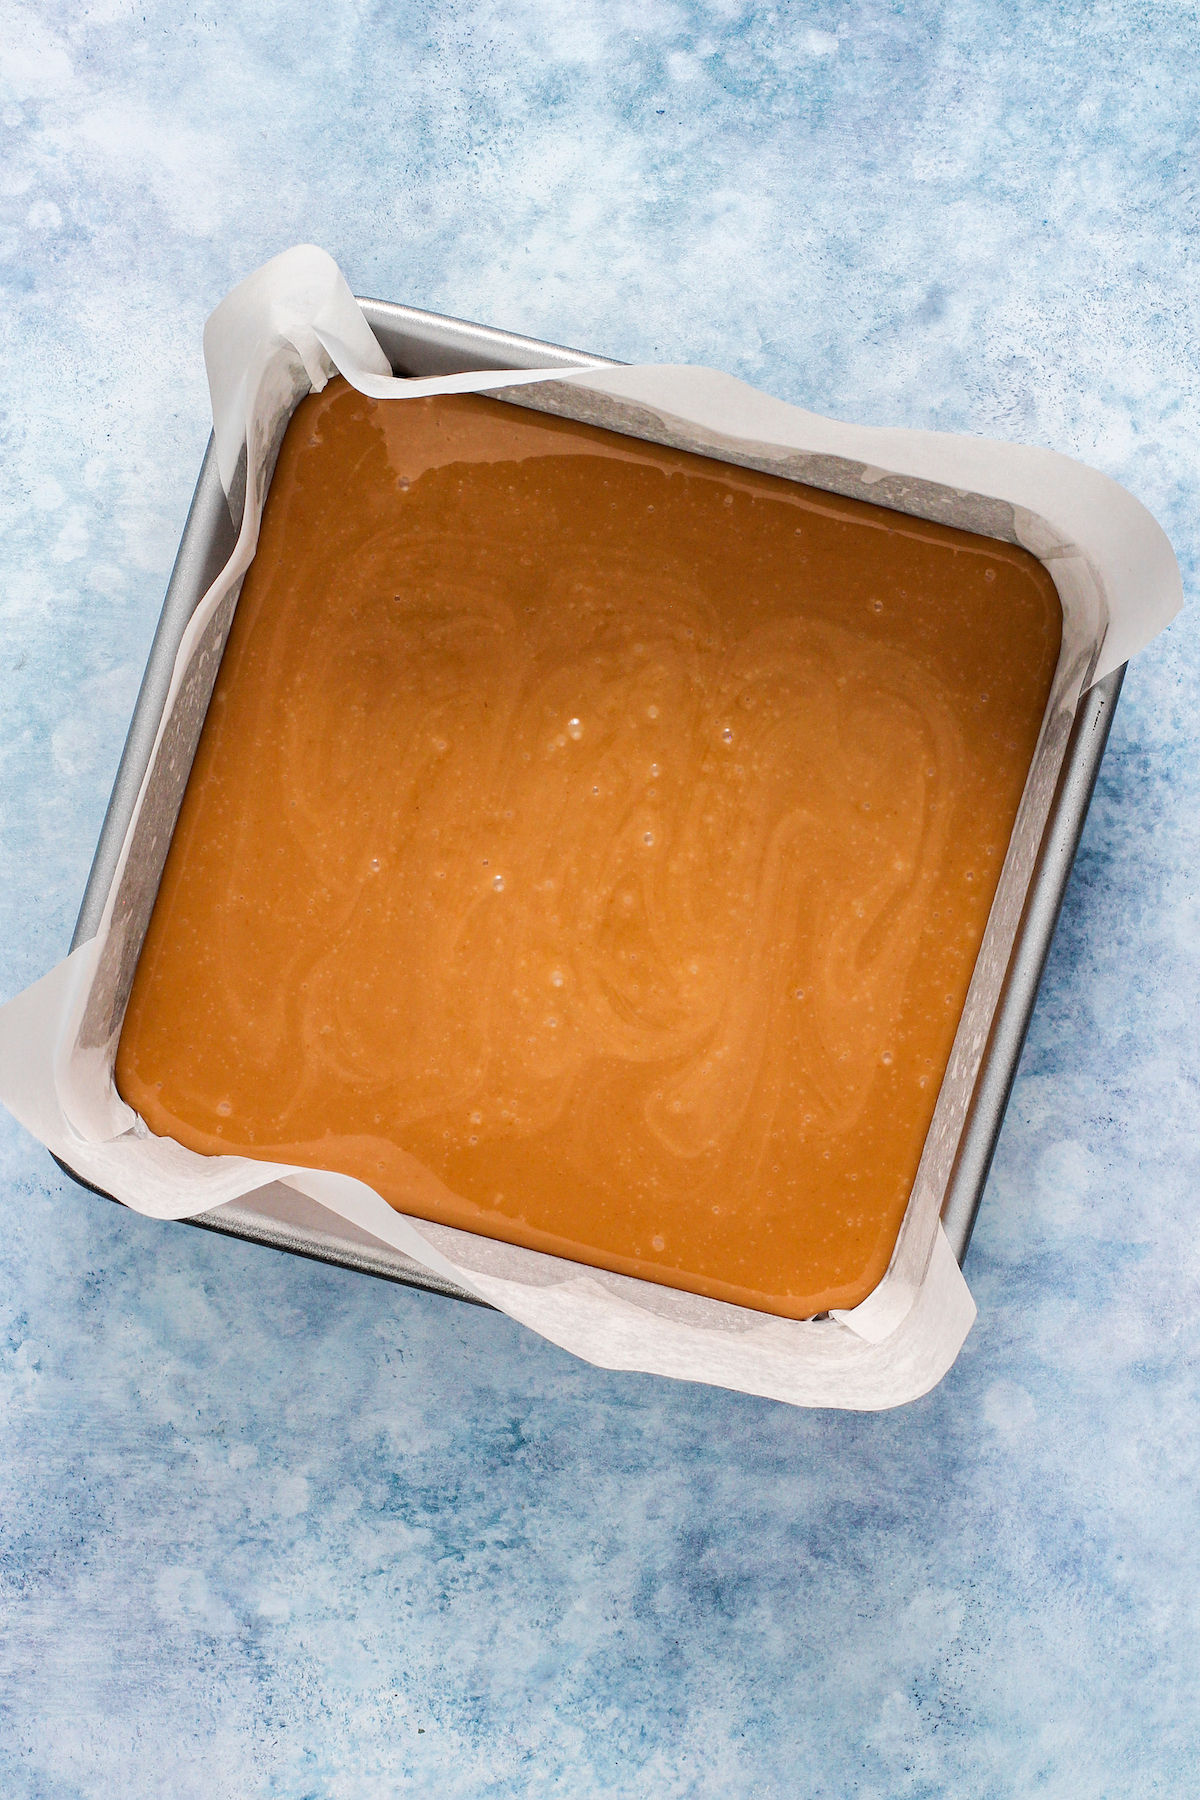 Caramel poured into a baking pan lined with parchment paper.